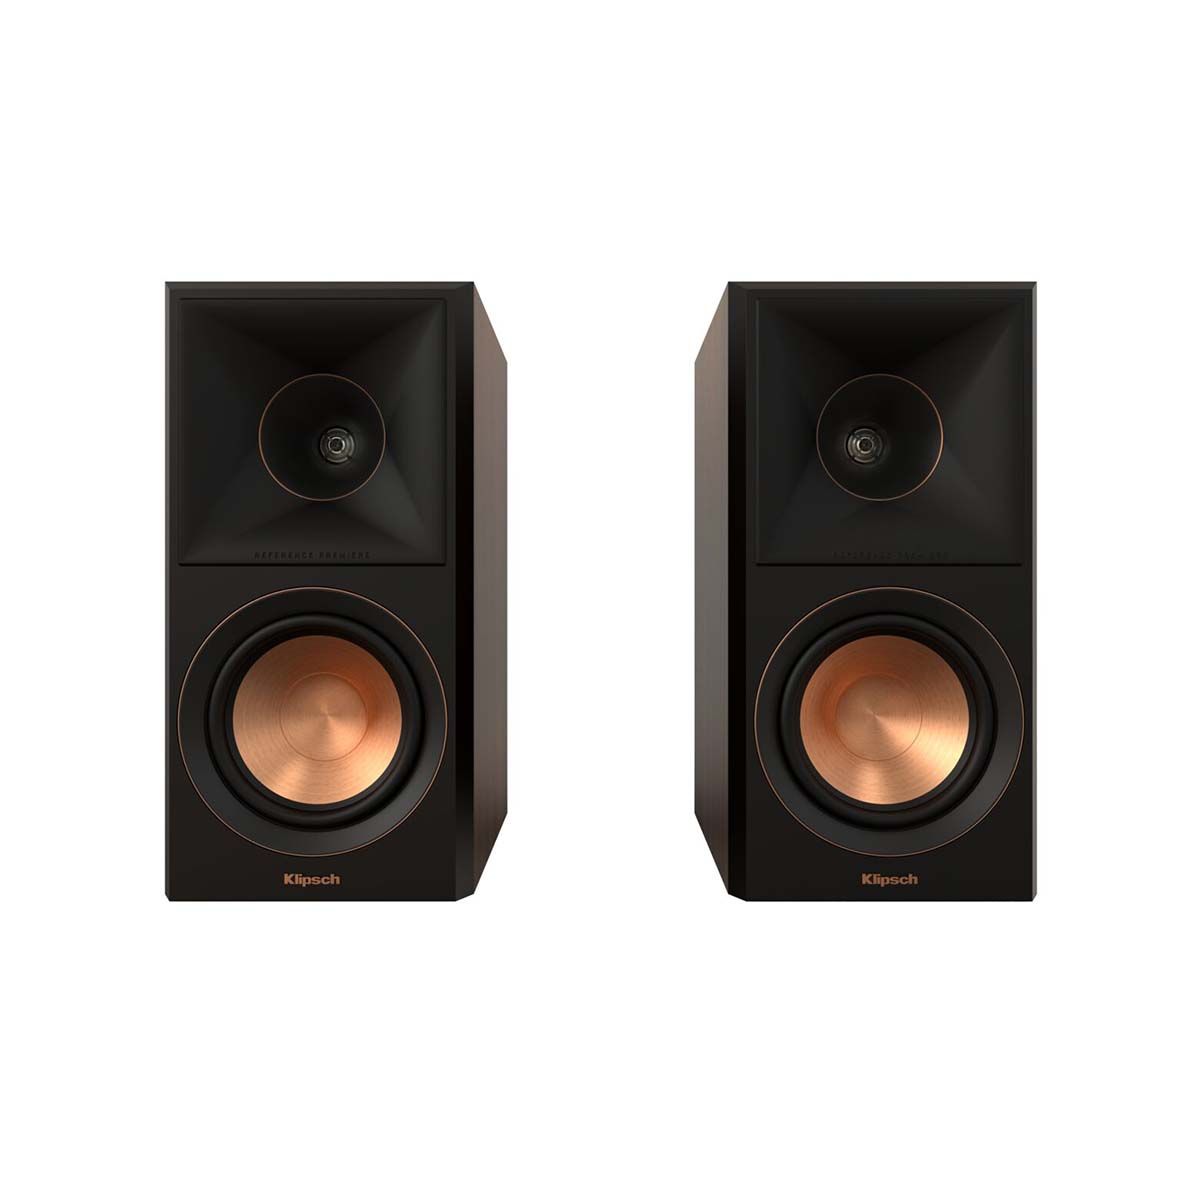 Klipsch RP-500M II Bookshelf Speakers - Walnut - Pair - front view of pair without grills